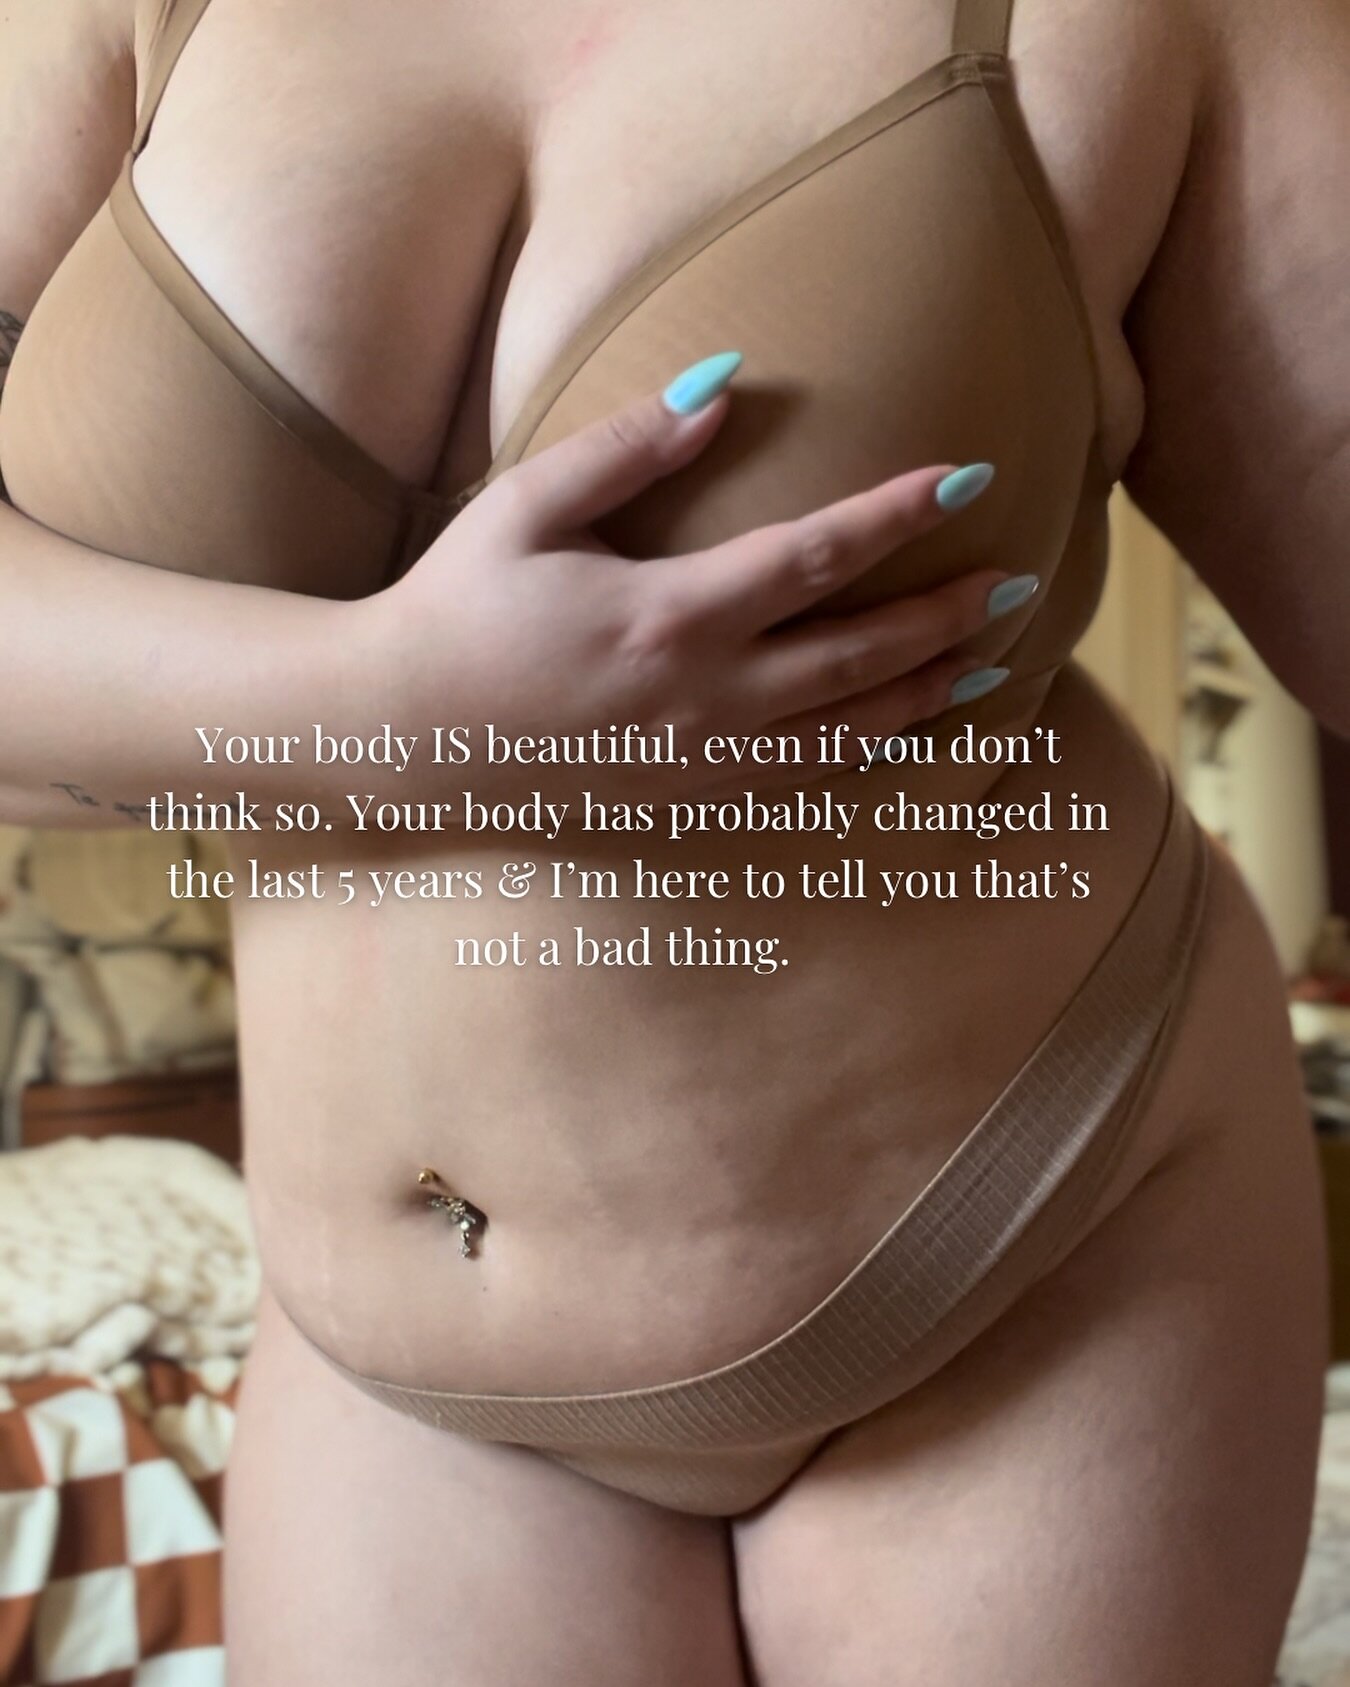 A transparent and raw post. 

My body has changed a lot in the last five years. Most of our bodies have!! I know that&rsquo;s not a bad thing. 

But hey, if you feel like it&rsquo;s a bad thing you&rsquo;re not alone. 

It&rsquo;s still hard and it&r